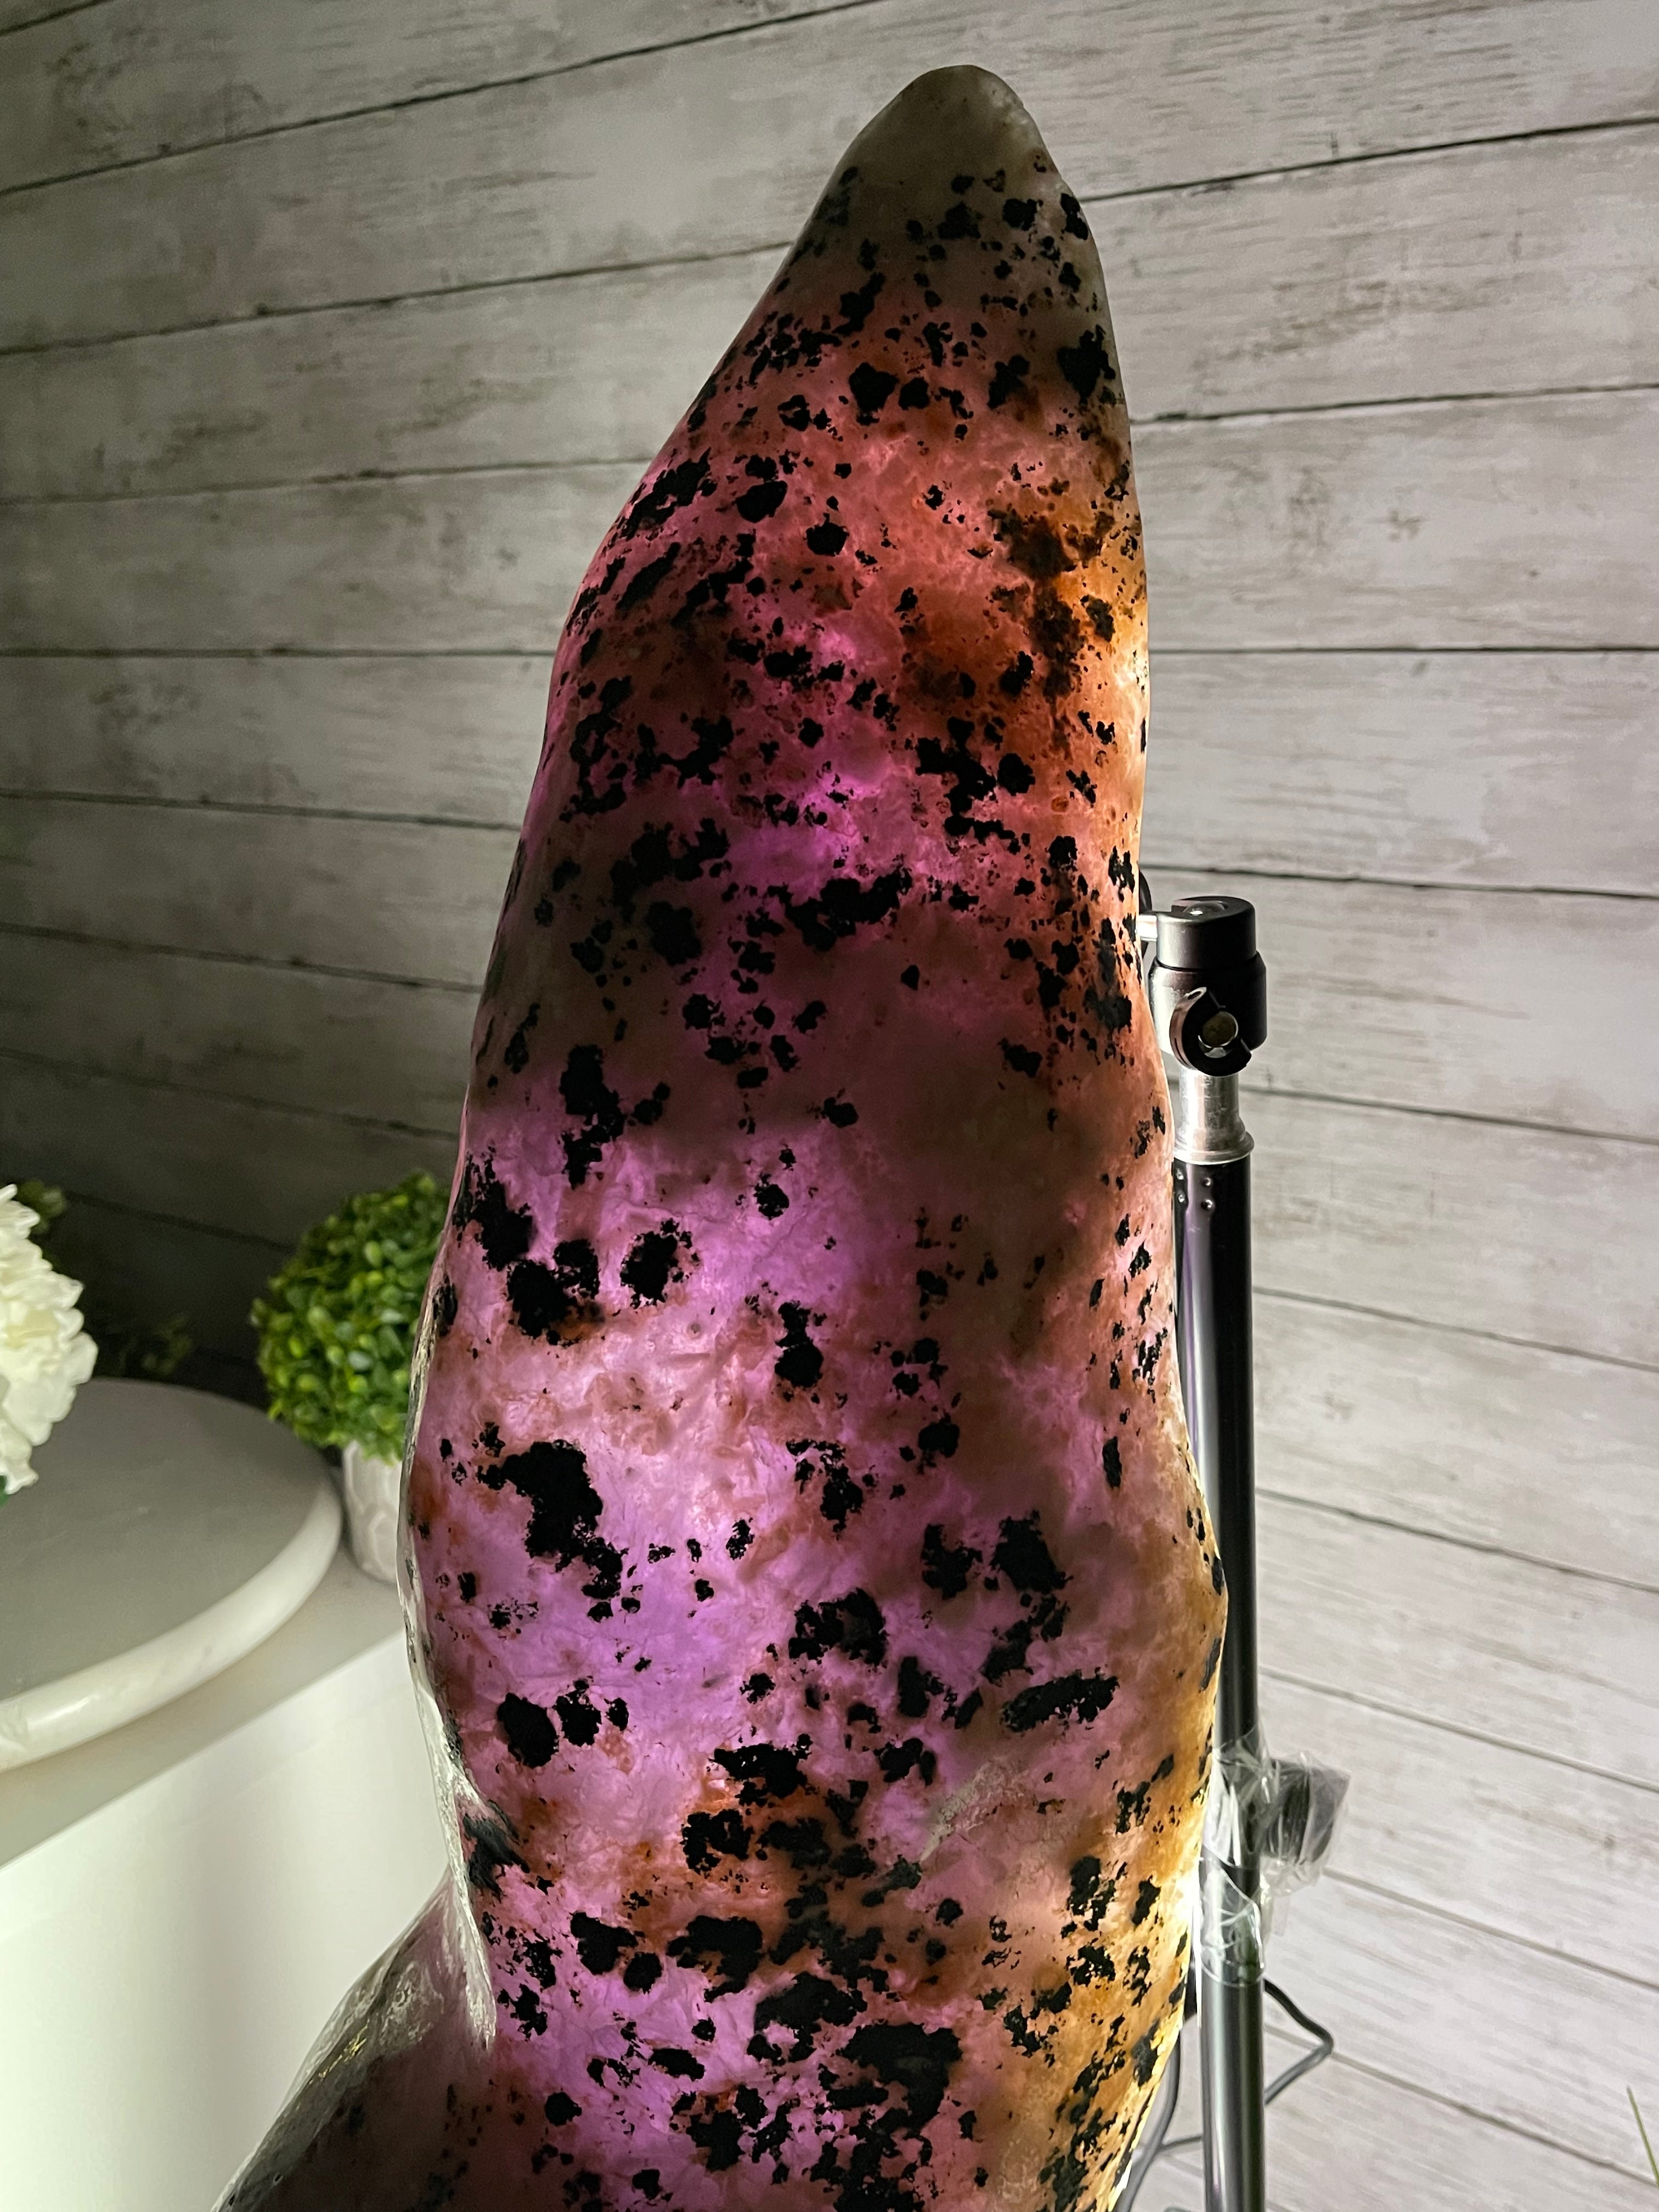 Large Extra Plus Quality Polished Brazilian Amethyst Cathedral, 157 lbs & 50.6” Tall Model #5602-0146 by Brazil Gems - Brazil GemsBrazil GemsLarge Extra Plus Quality Polished Brazilian Amethyst Cathedral, 157 lbs & 50.6” Tall Model #5602-0146 by Brazil GemsPolished Cathedrals5602-0146